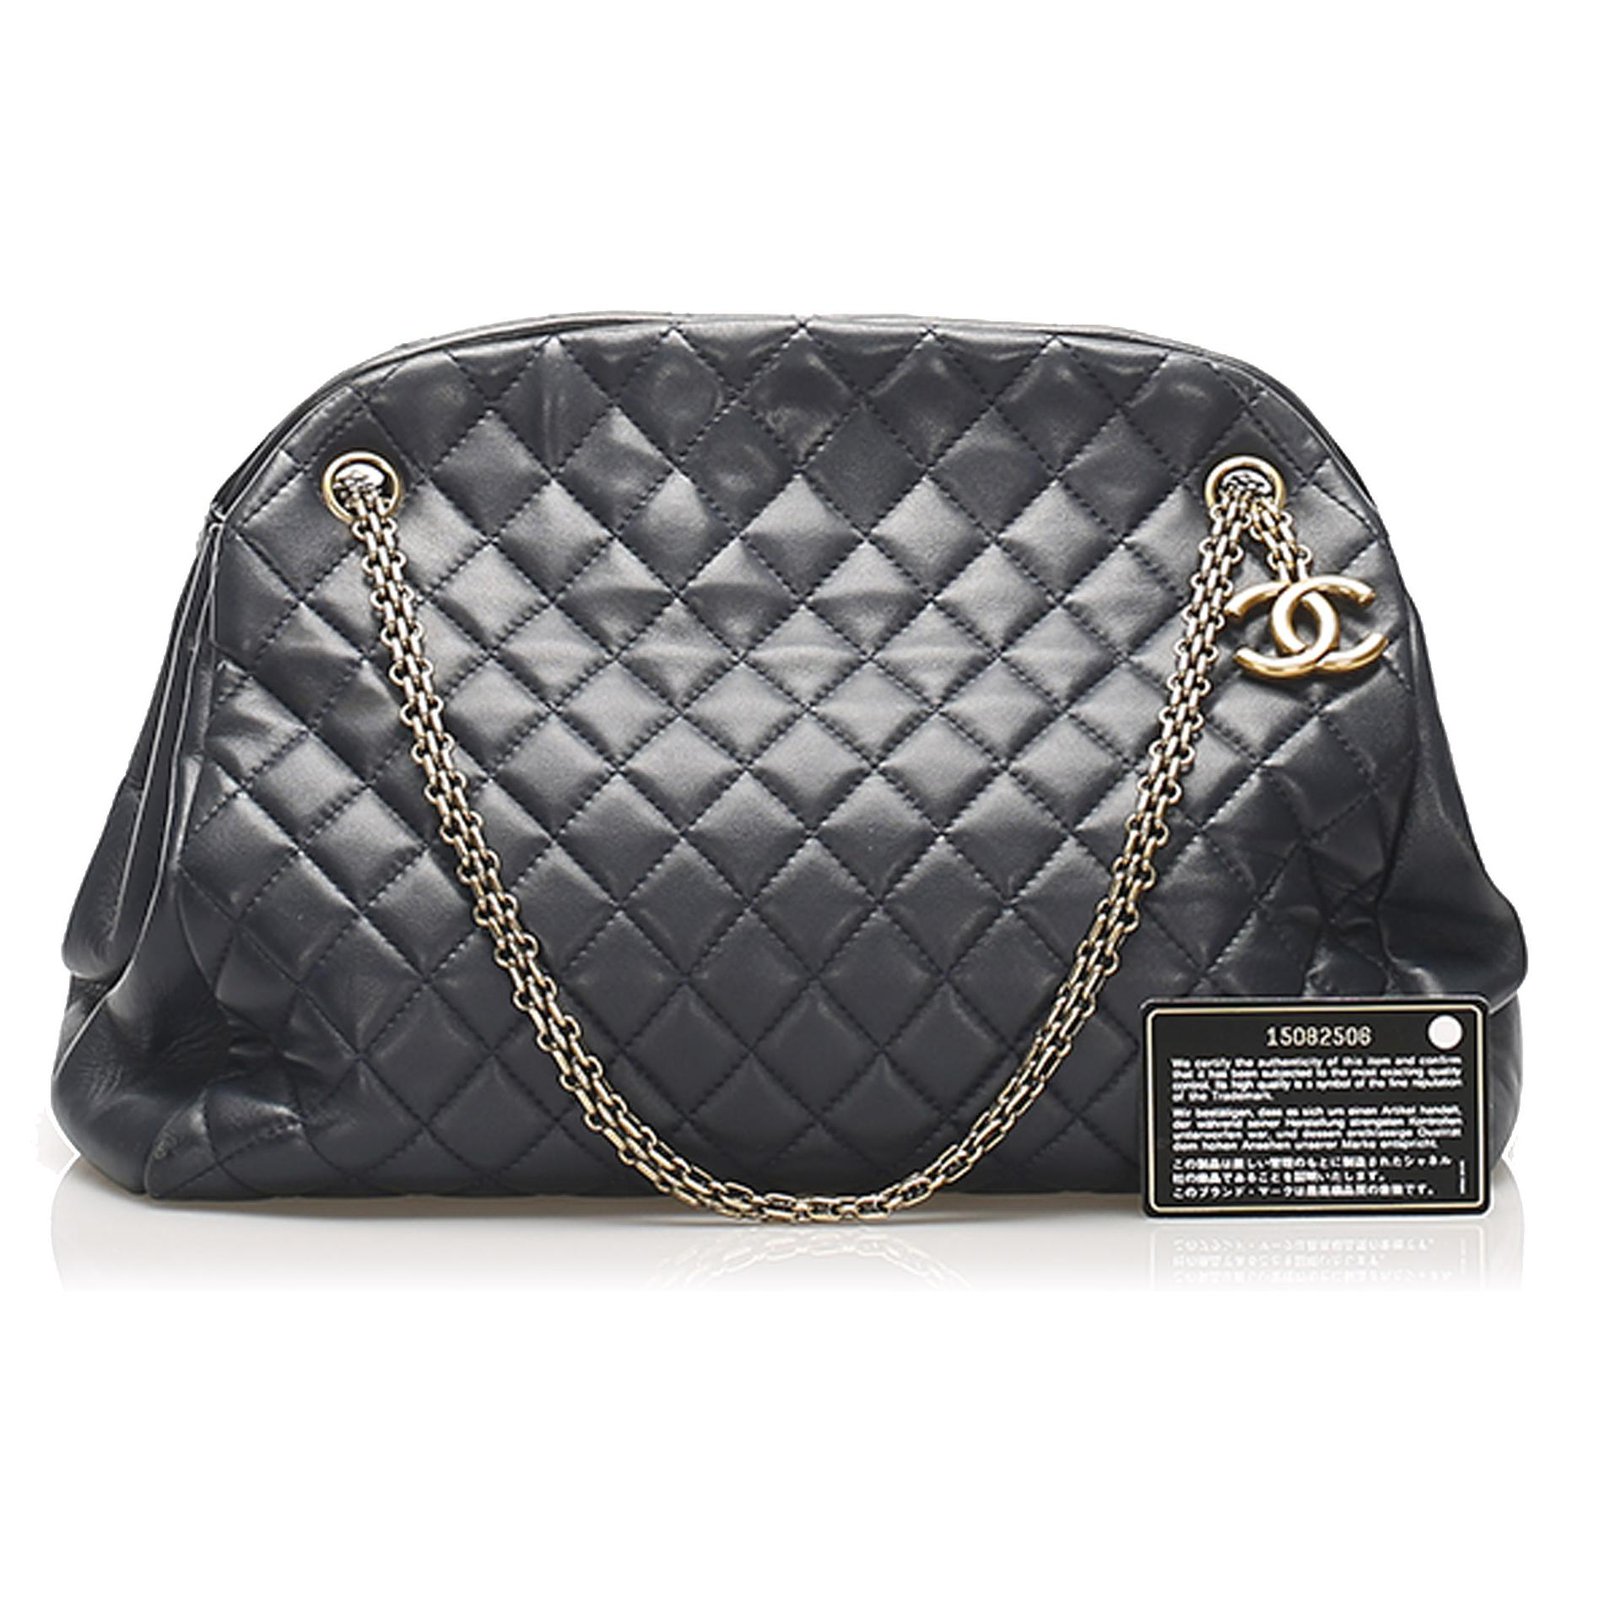 Chanel Blue Quilted Patent Leather Large Just Mademoiselle Bowling Bag  Chanel | The Luxury Closet